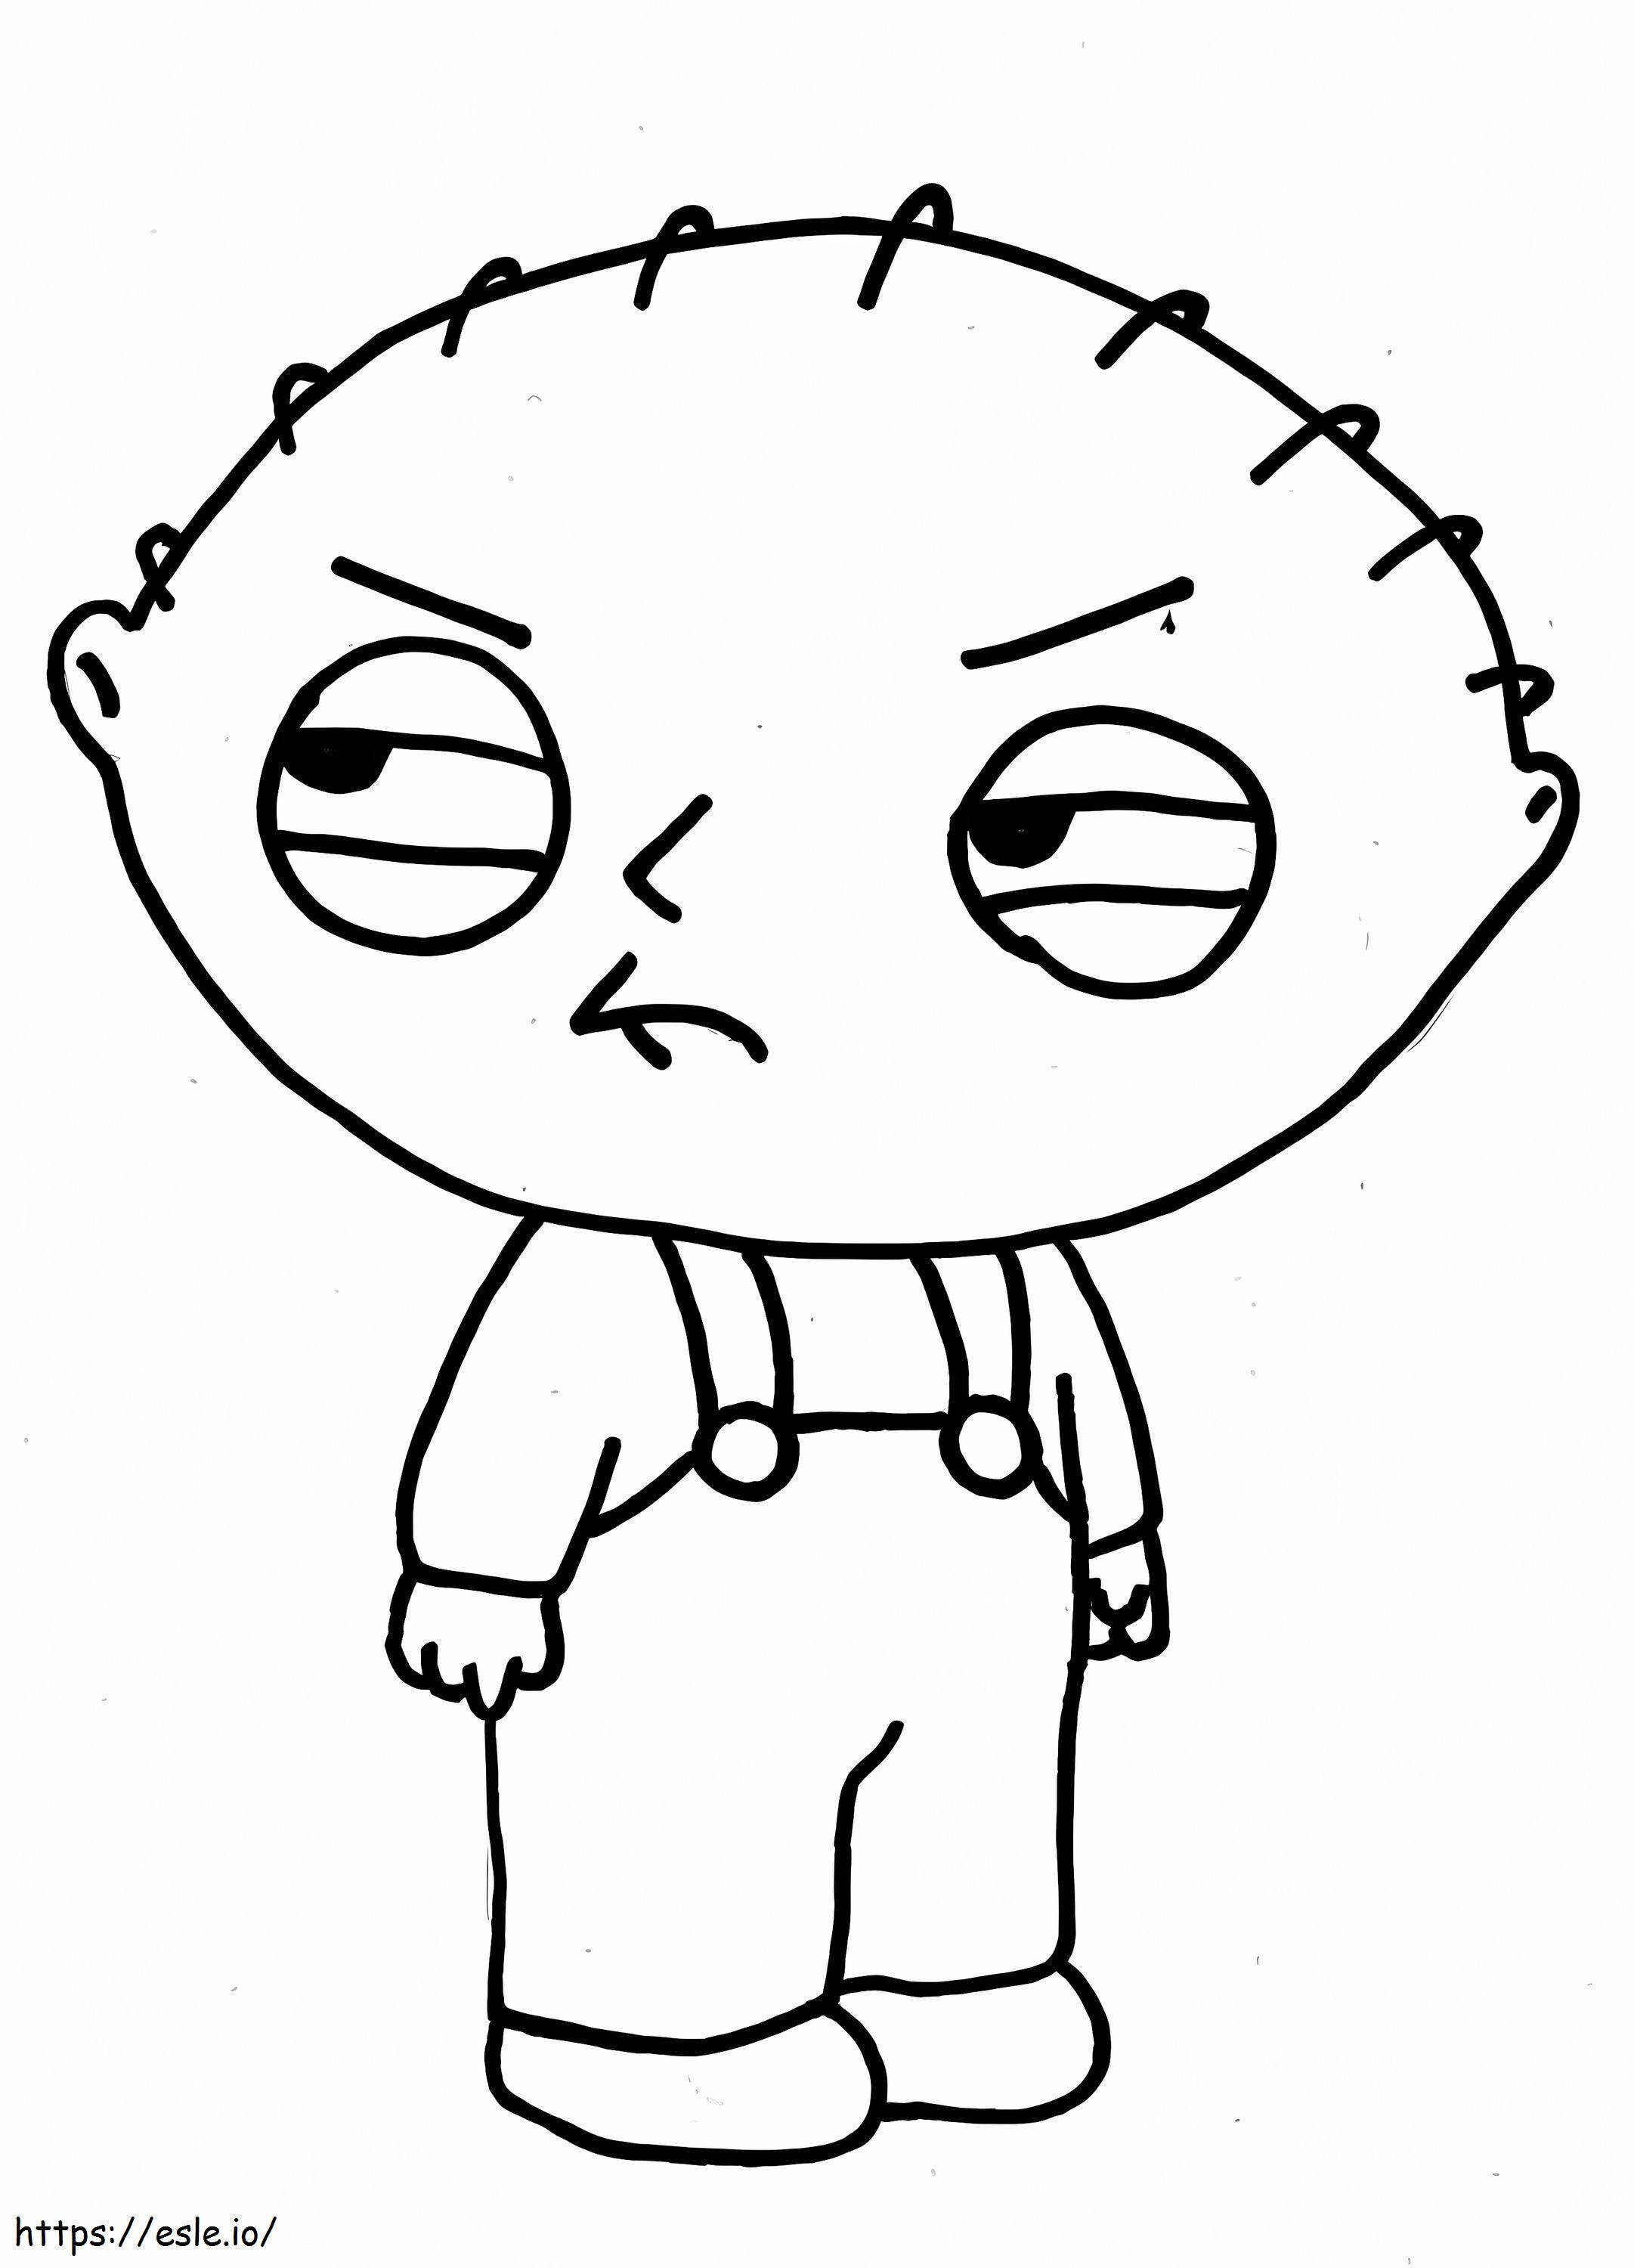 Stewie griffin coloring page